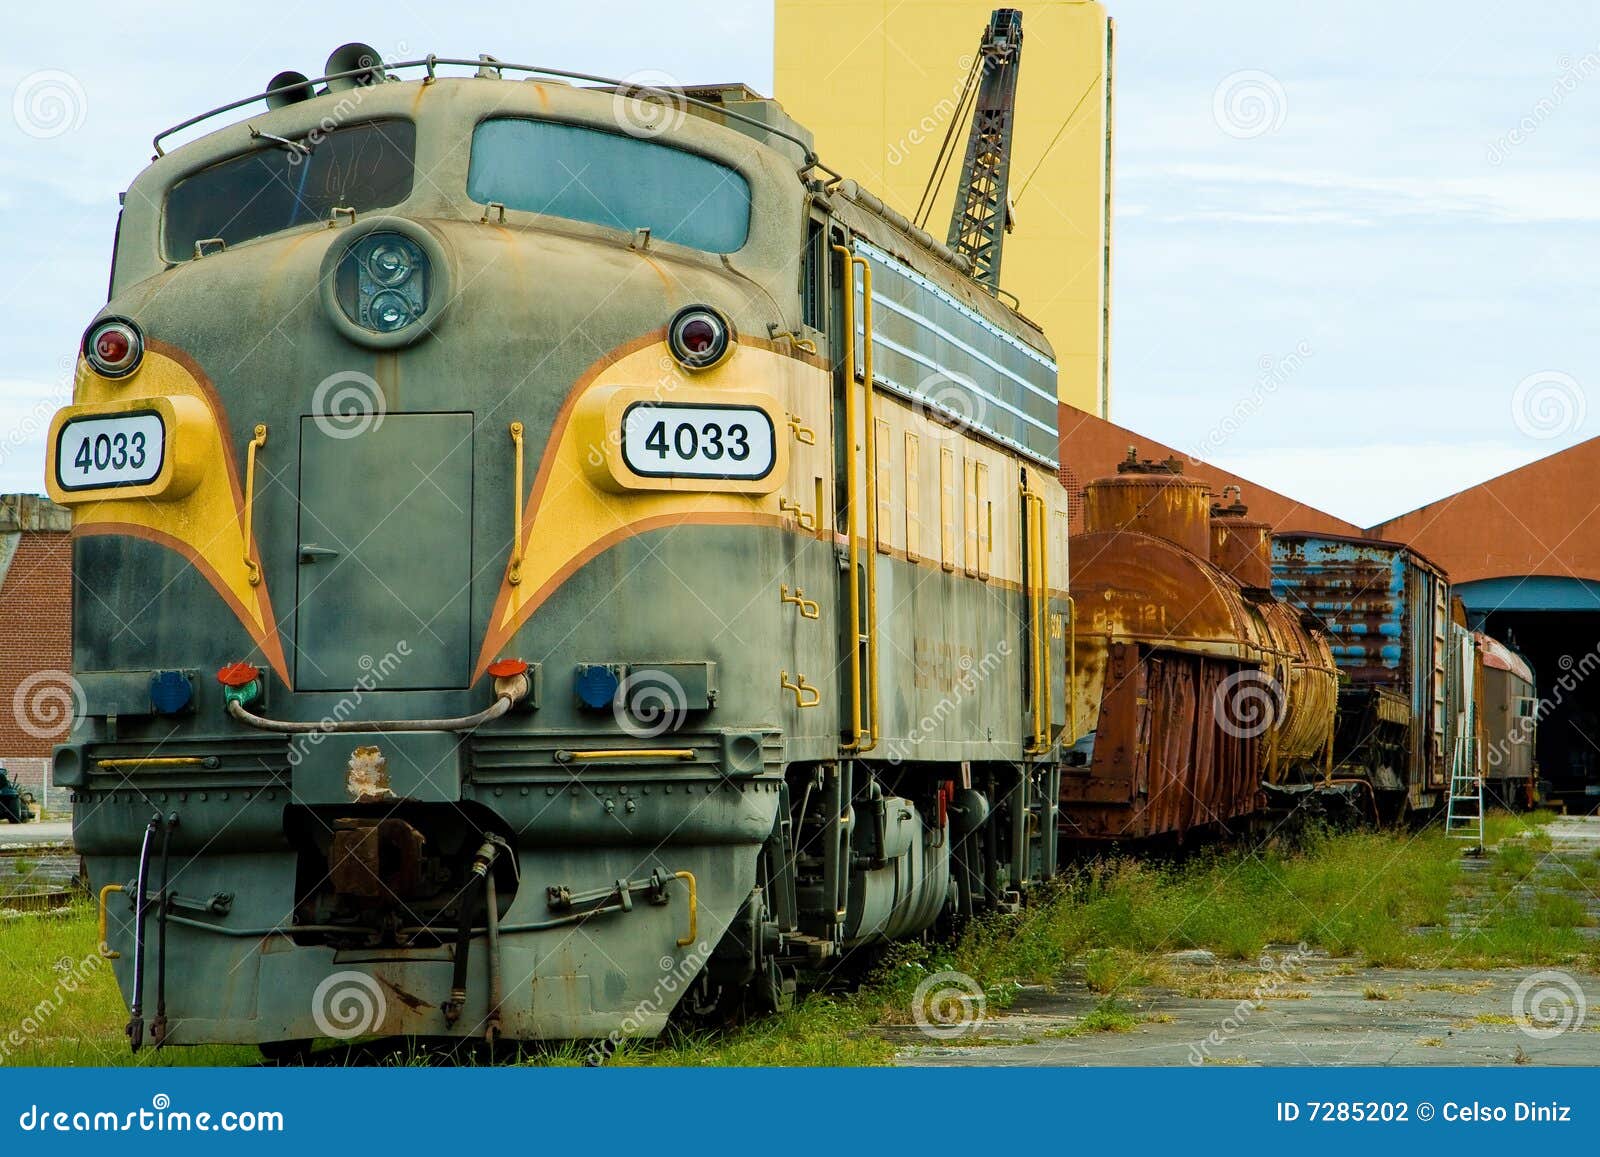 old railway train and carriages